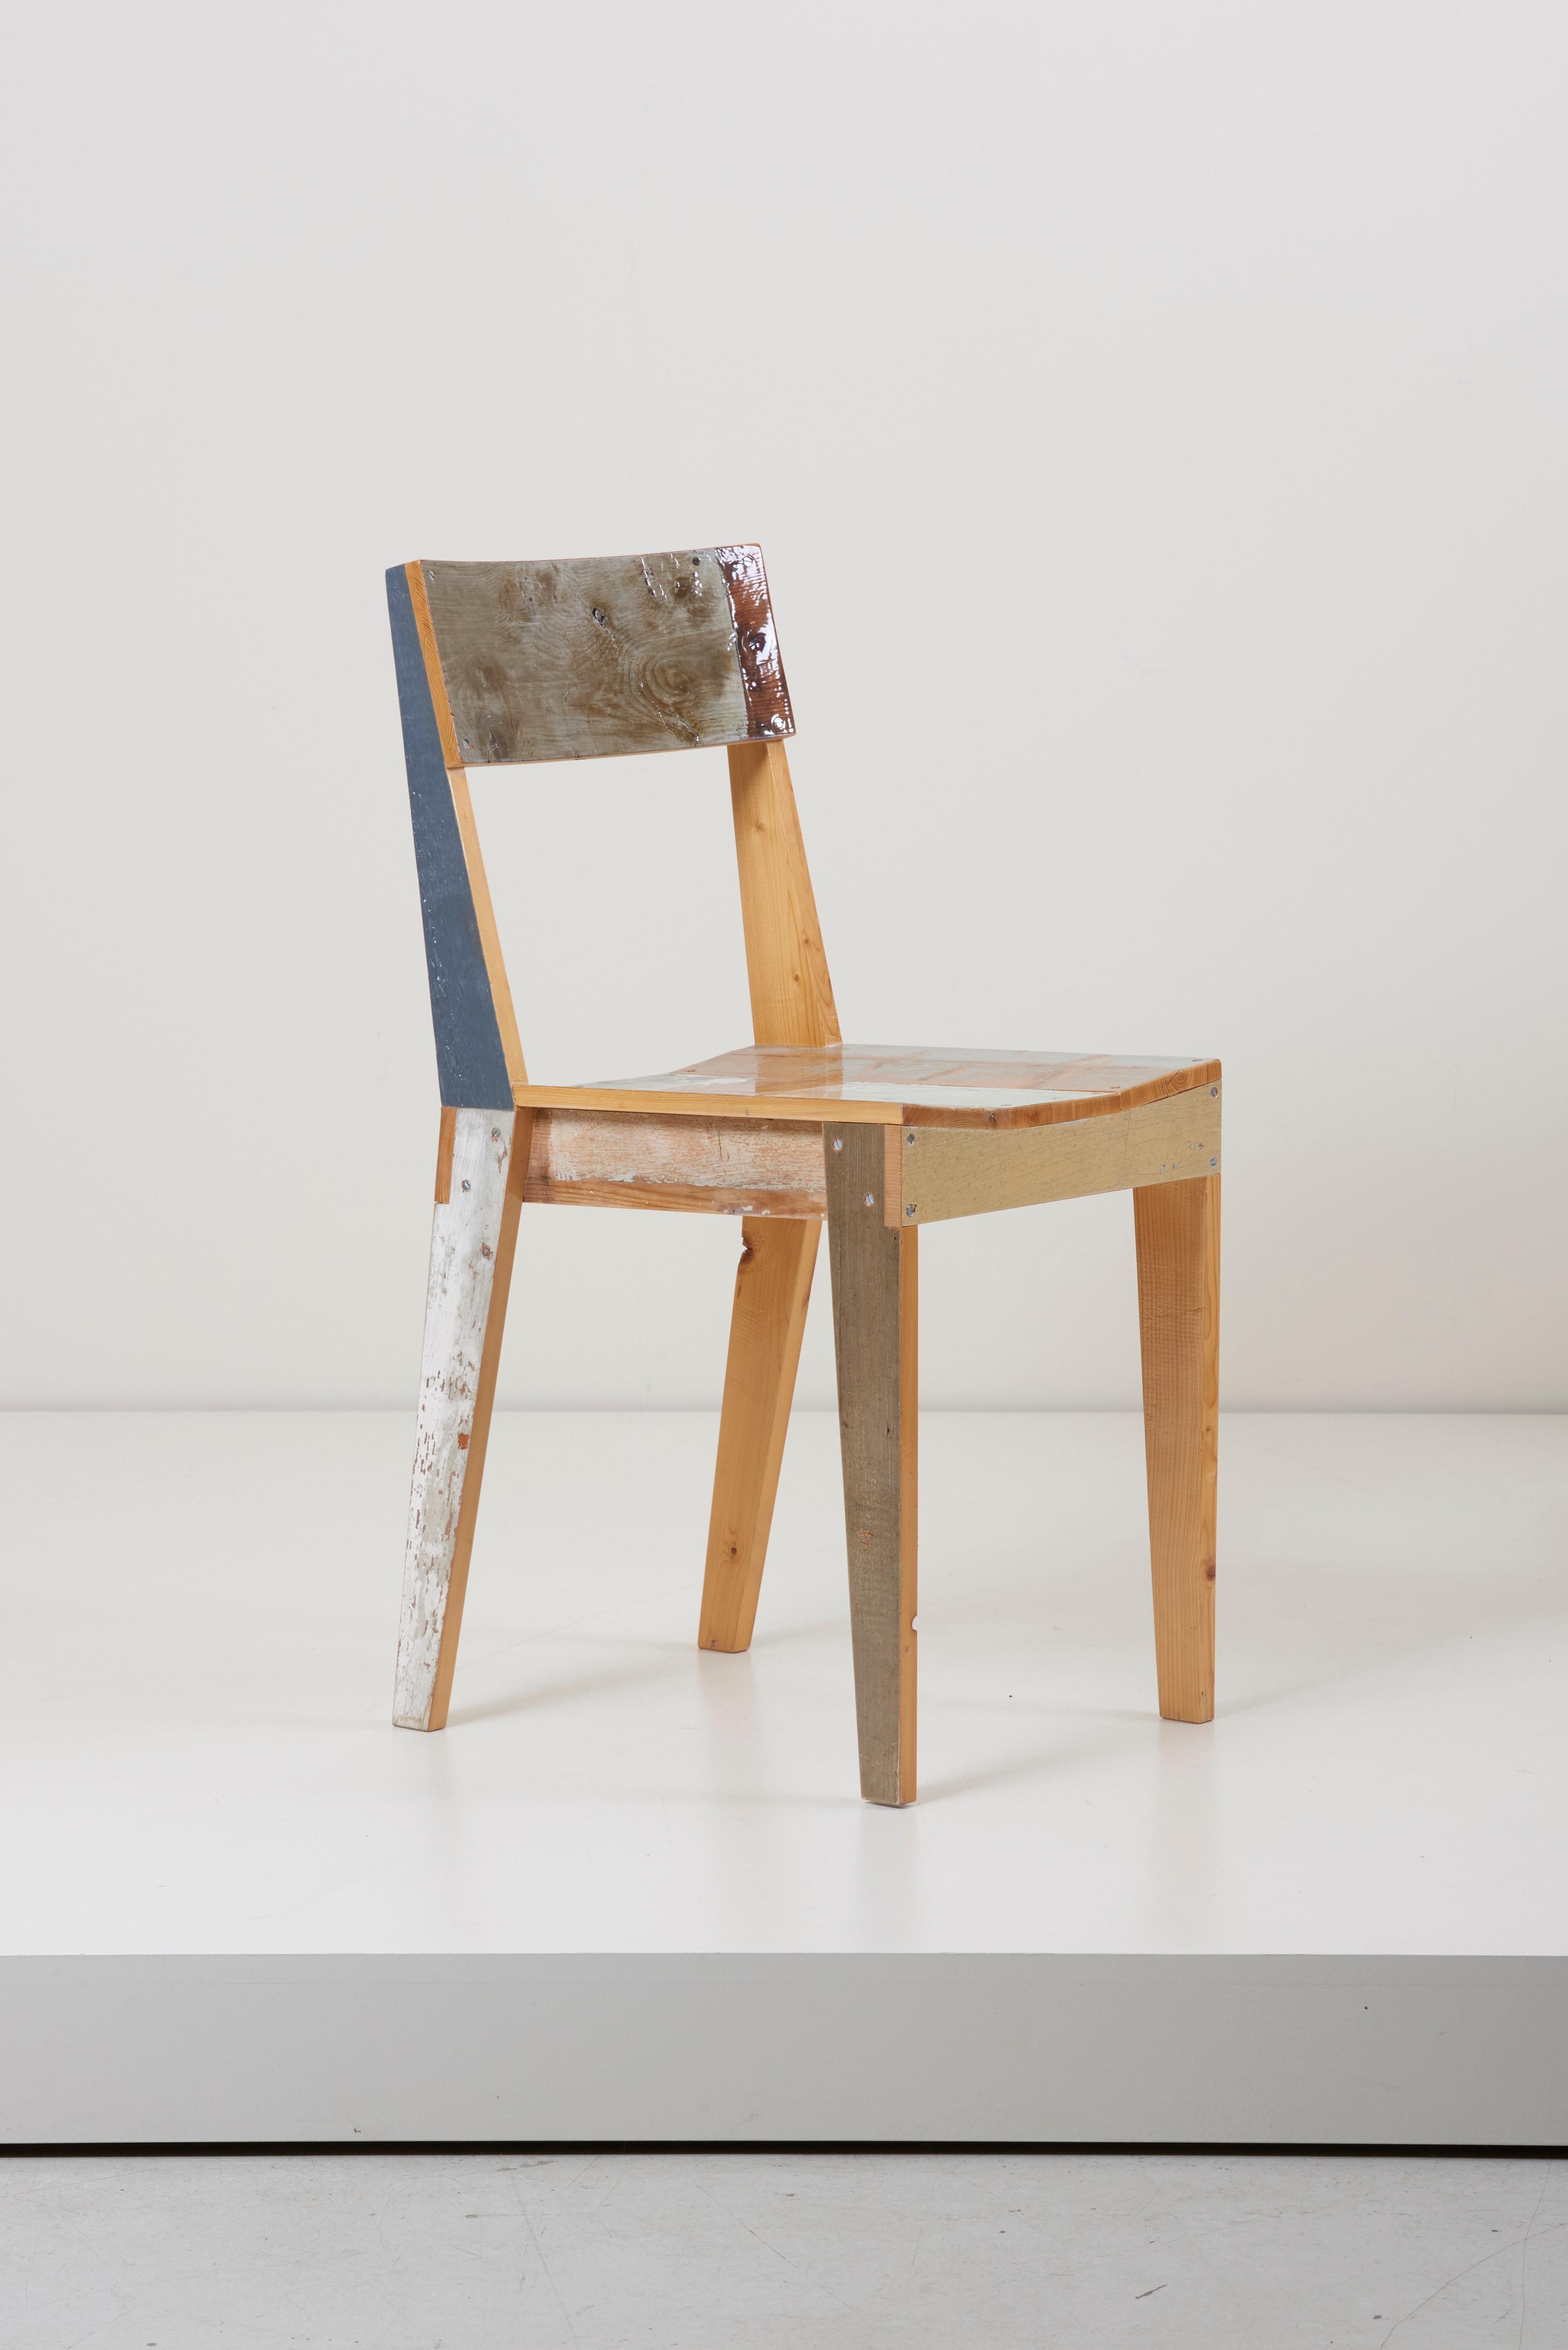 Set of Four Lacquered Oak Chairs in Scrapwood by Piet Hein Eek 2